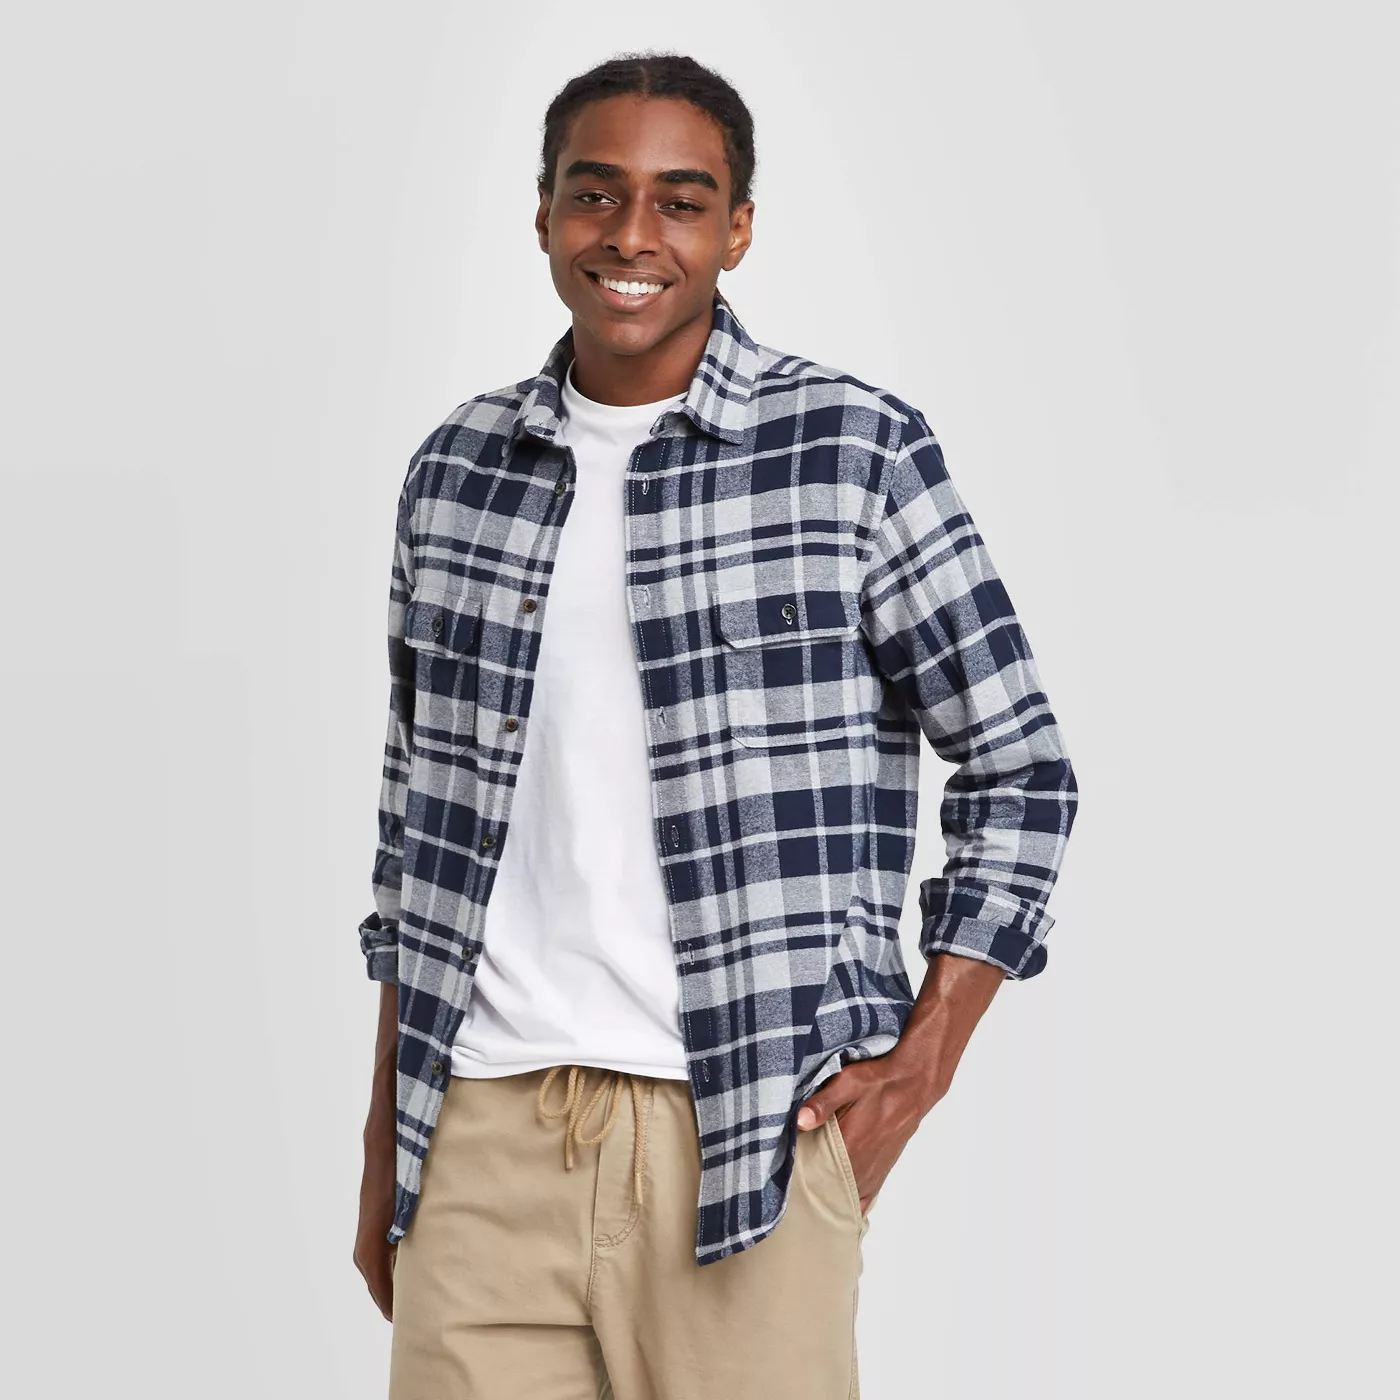 Men’s Standard Fit 2-Pocket Flannel Long Sleeve Button-Down Shirt - Goodfellow & Co™ - image 1 of 8